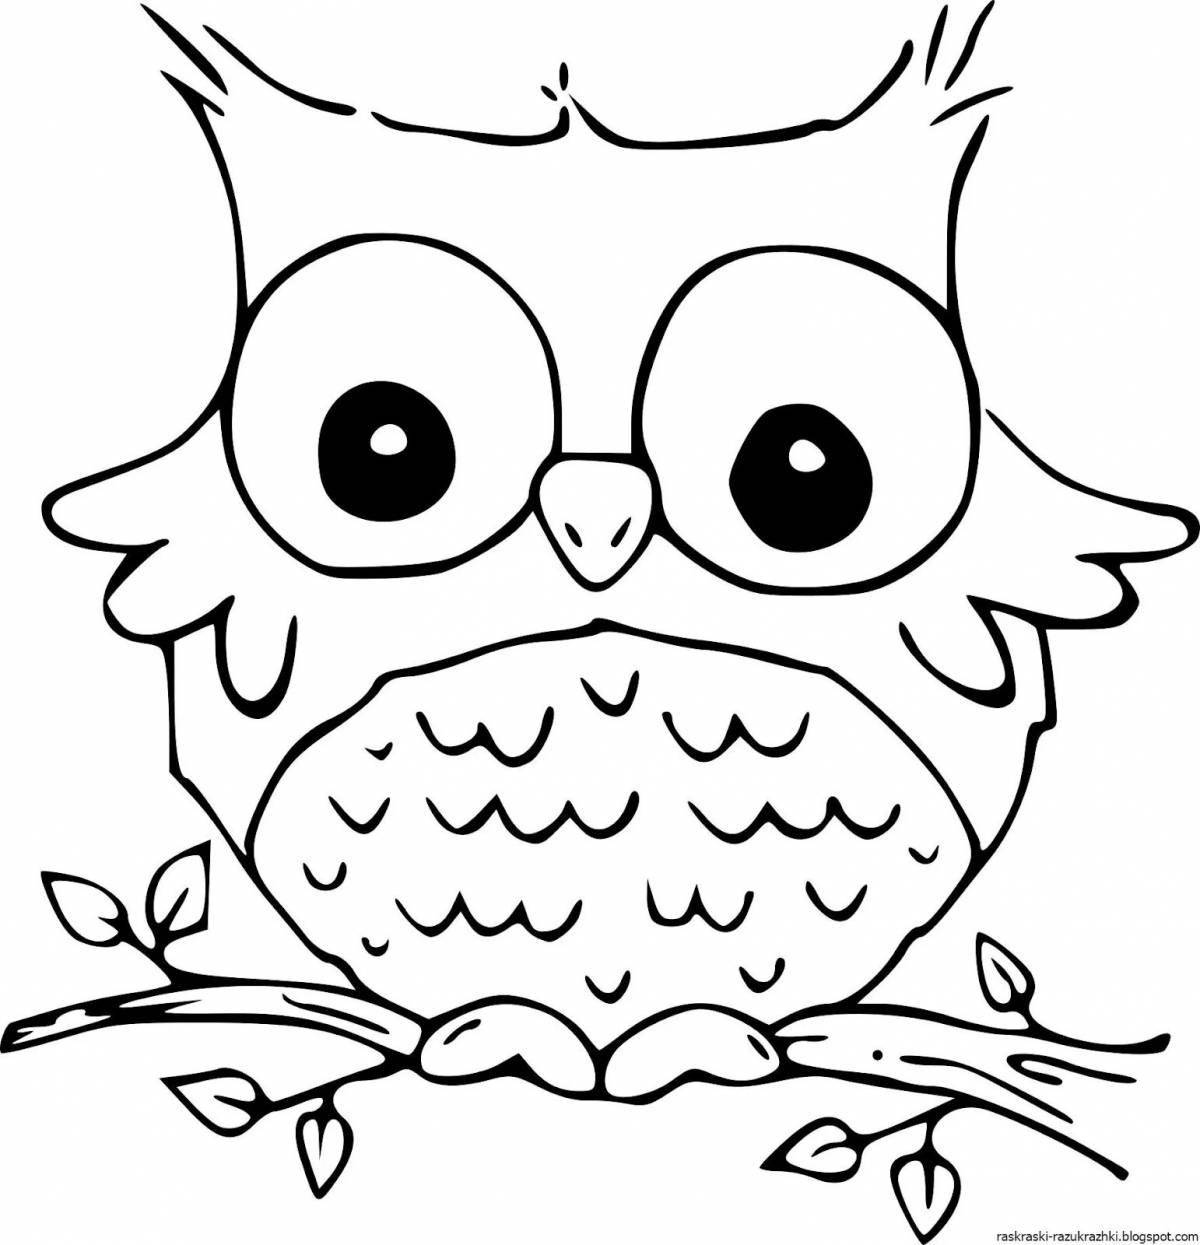 Fairy owl coloring book for kids